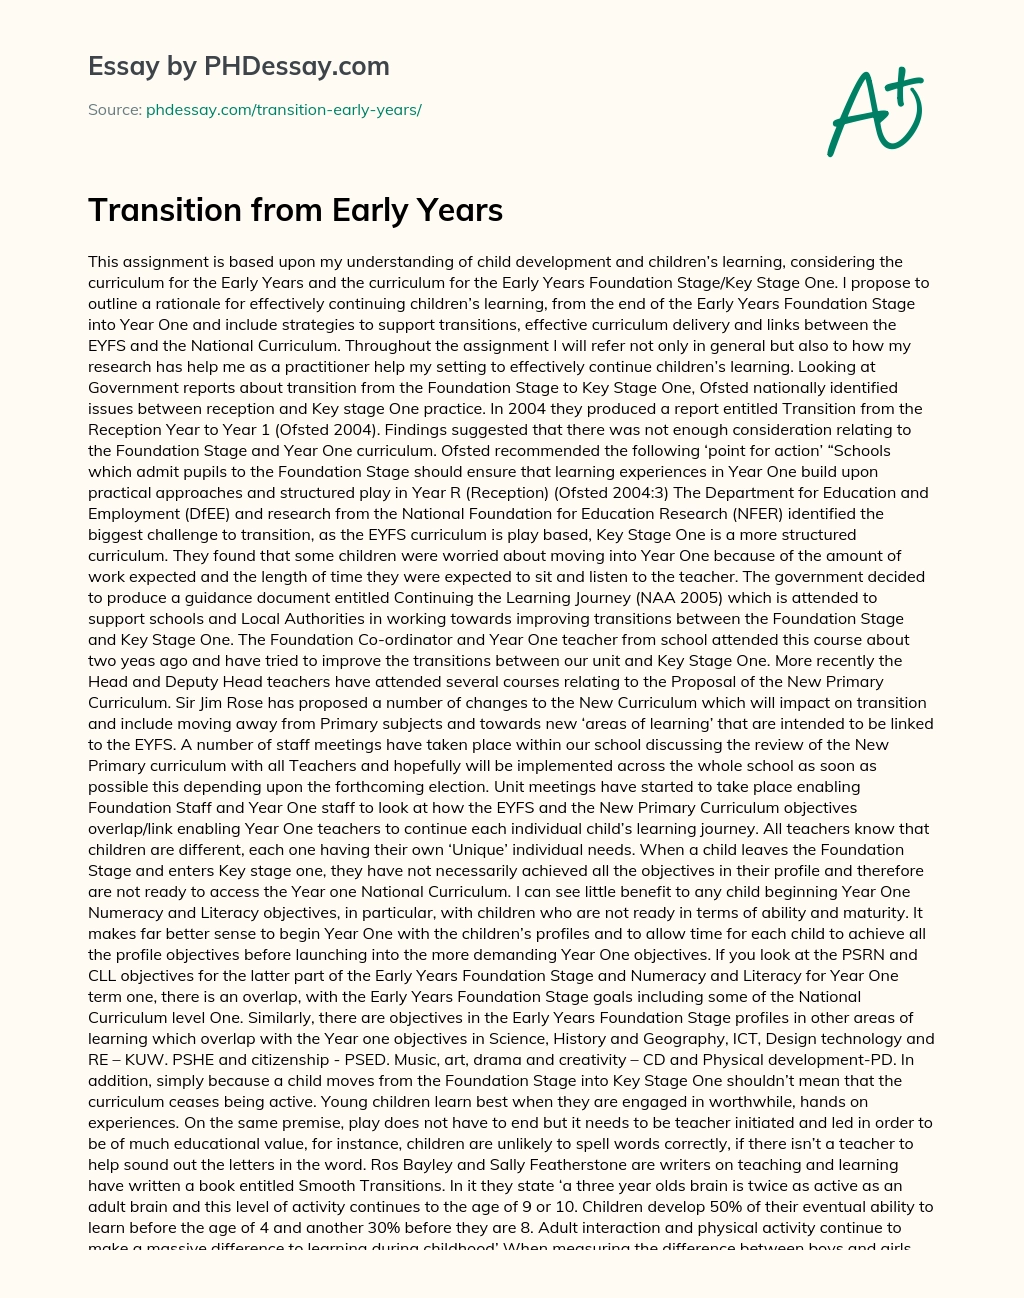 Transition from Early Years essay